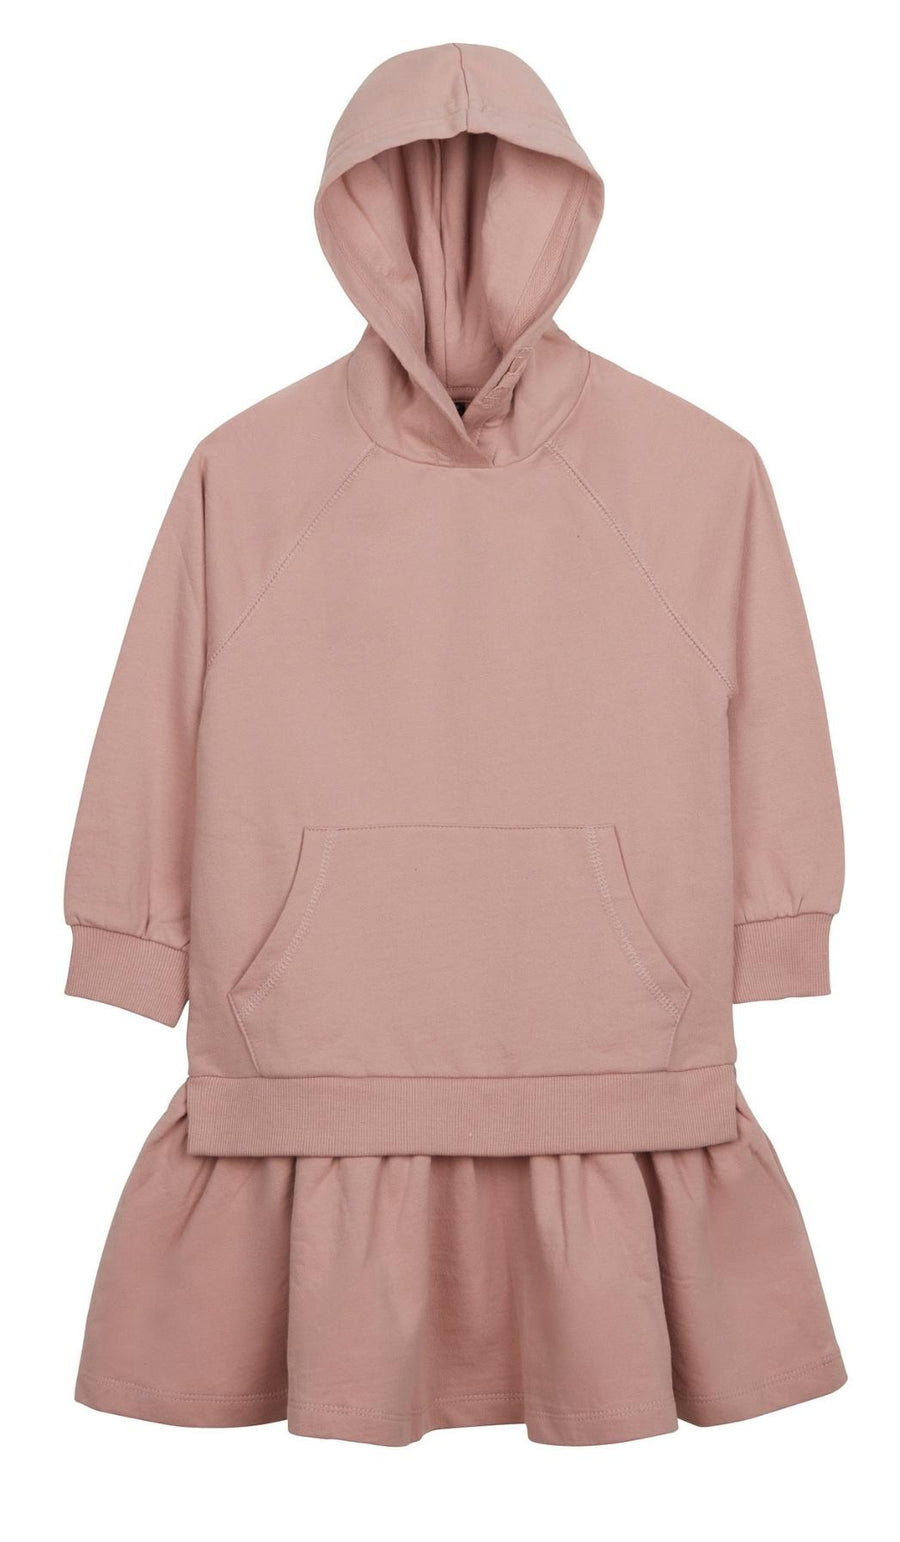 HOODIE FOOTER DRESS WITH DEMI SKIRT - Pale pink